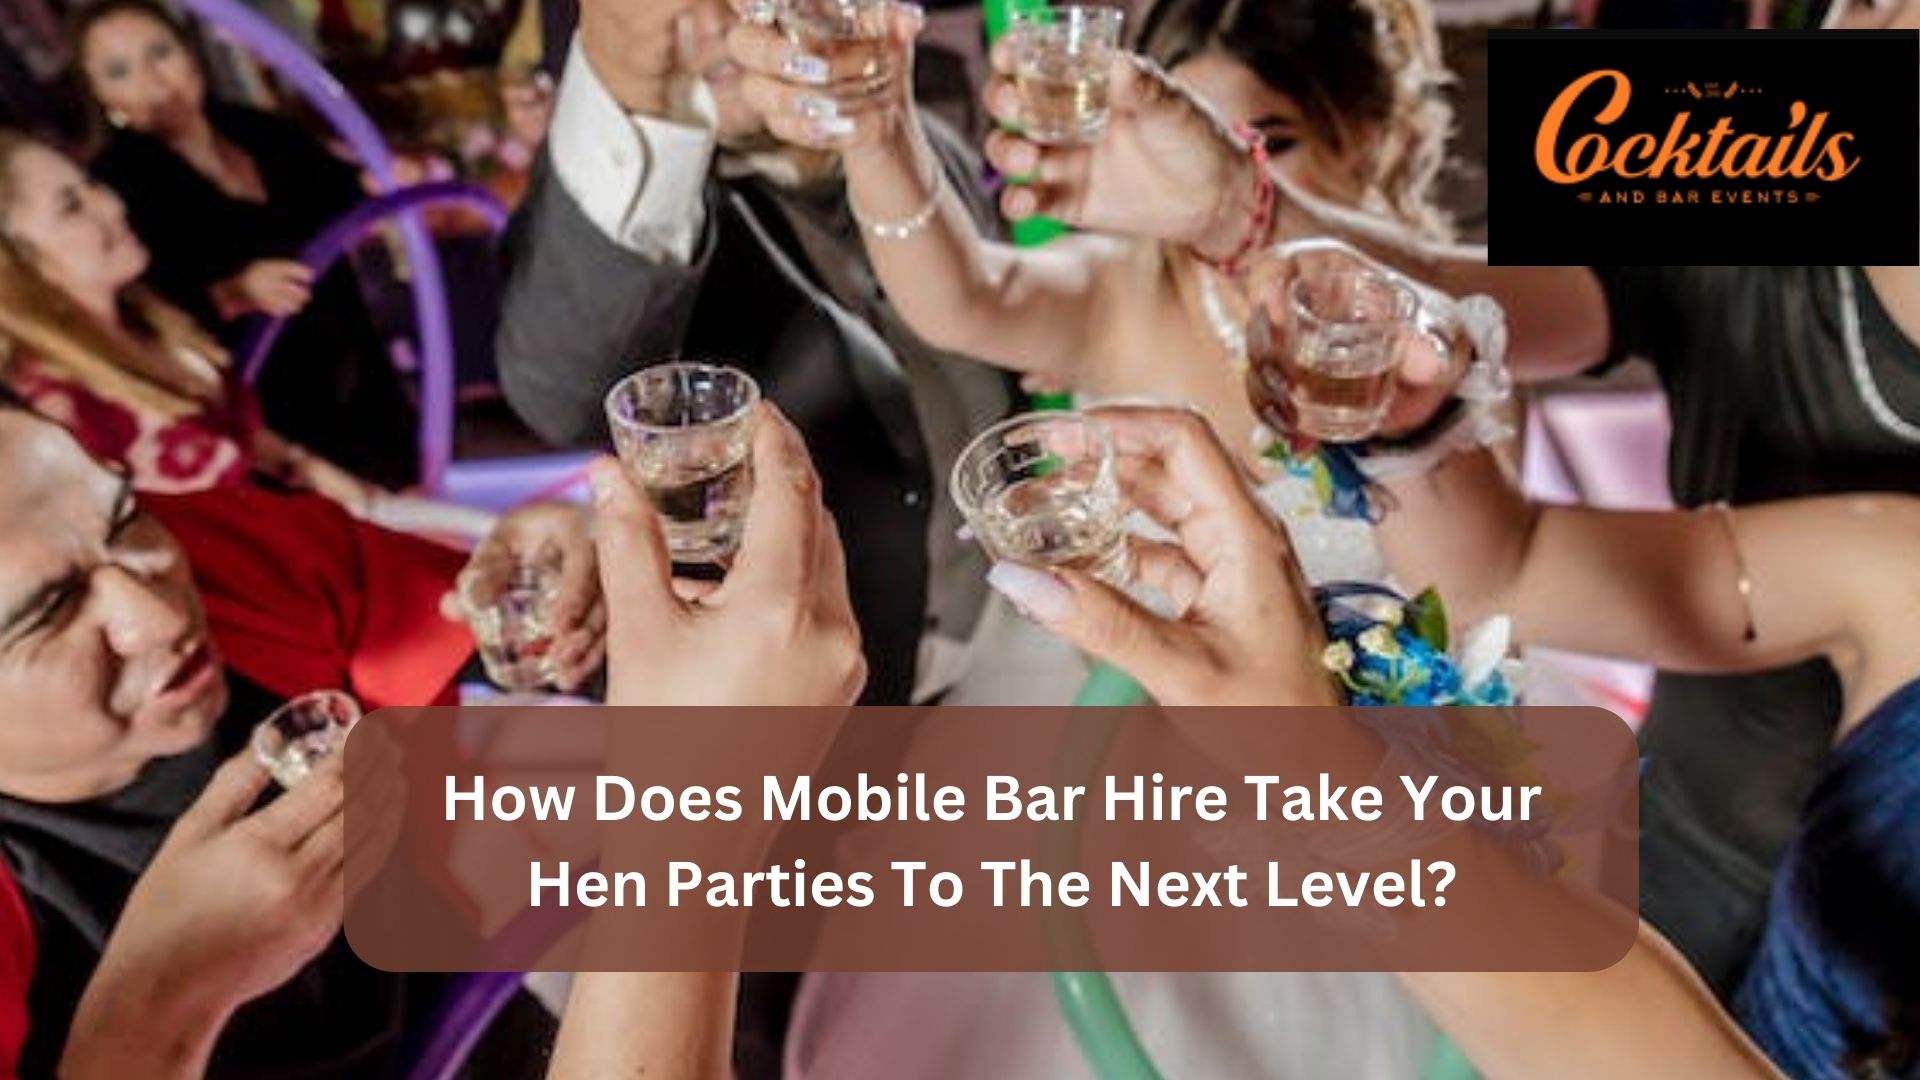 How Does Mobile Bar Hire Take Your Hen Parties To The Next Level? -